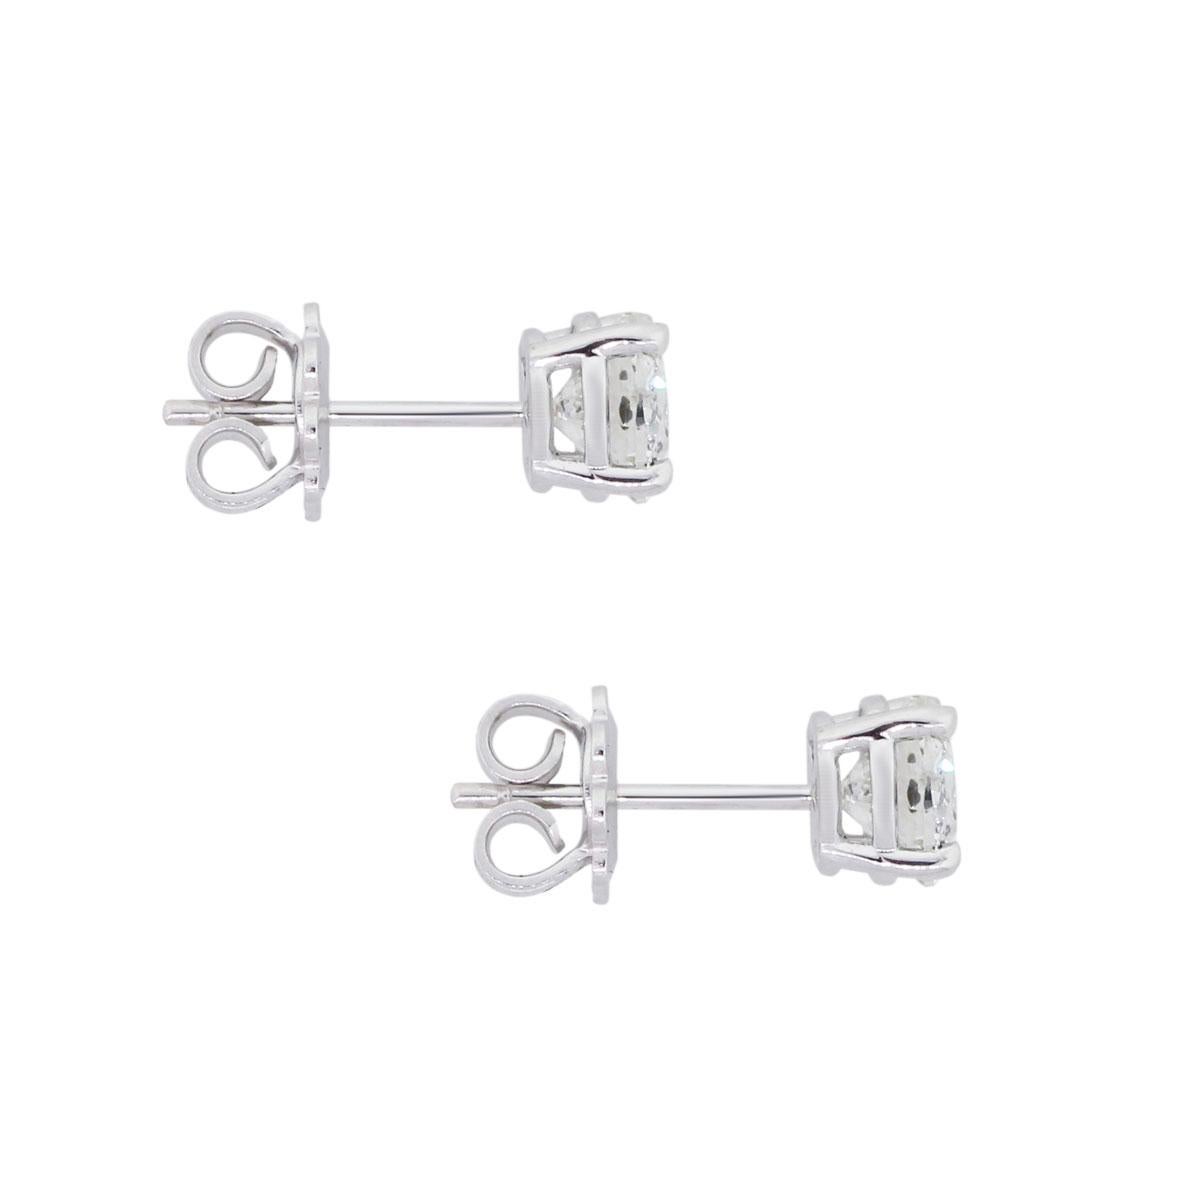 Material: 14k white gold
Diamond Details: Approximately 2.05ctw of round brilliant diamonds. Diamonds are G/H in color and SI2 in clarity.
Measurements: 0.61″ x 0.21″ x 0.21″
Earring Backs: Post friction
Total Weight: 2.4g (1.6dwt)
Additional